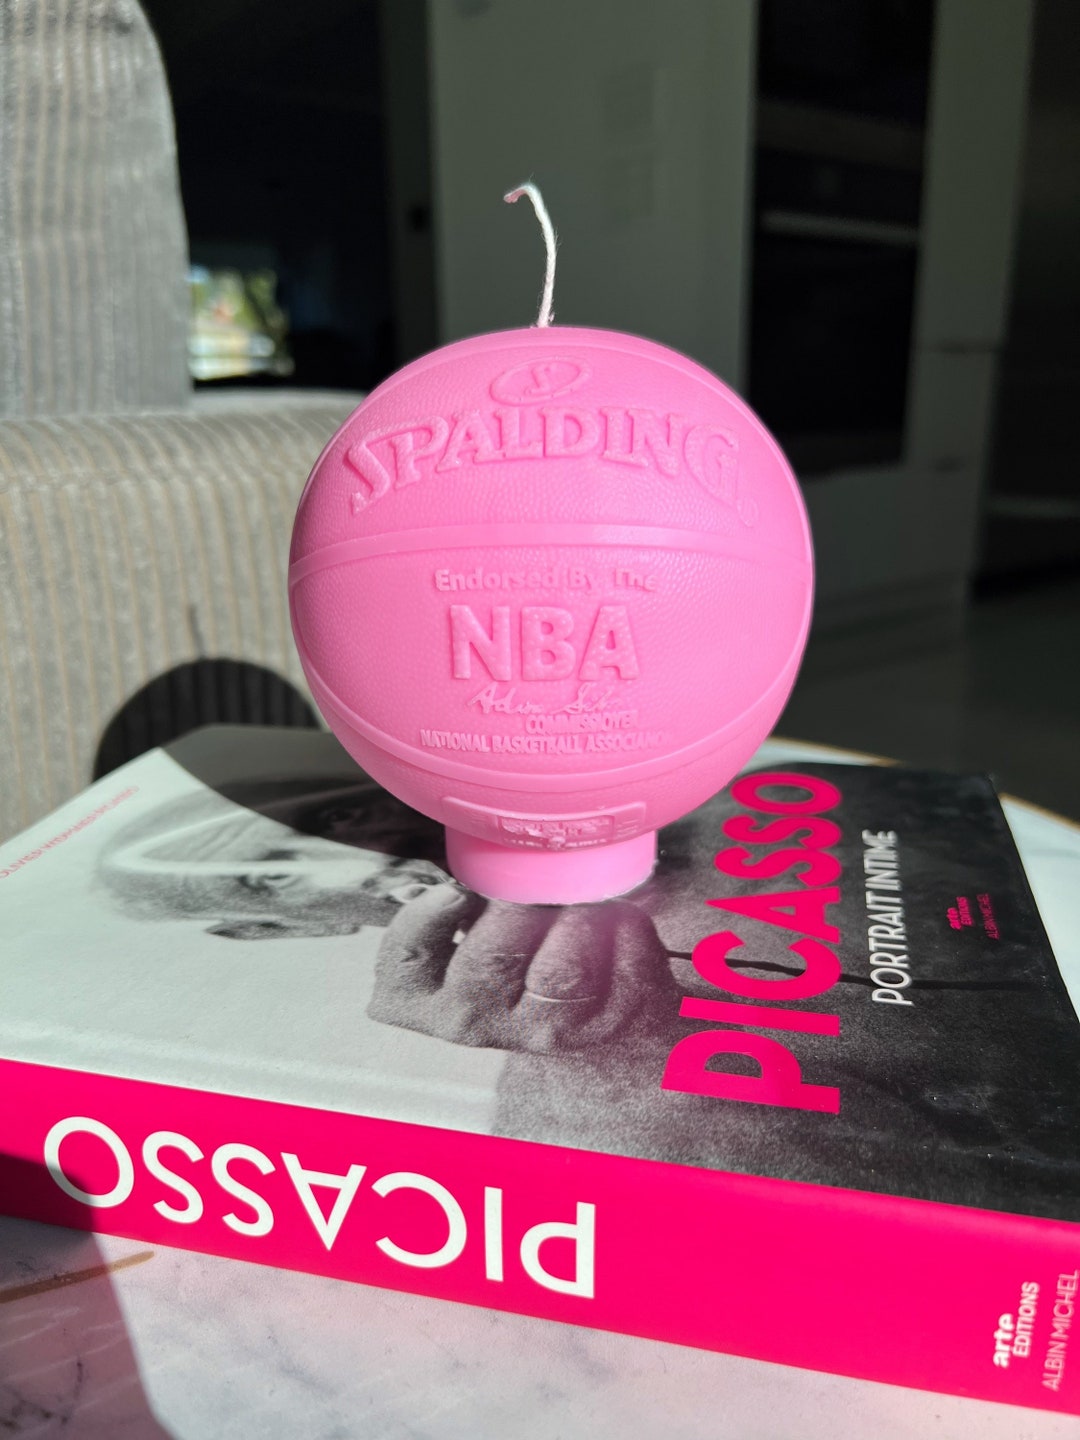 NBA Basketball Pillar Candle, Hot Pink Candle, Spalding, Gift For Sports Lover, Gift For Him, Hypebeast, Minimalistic, Lebron James, Kobe